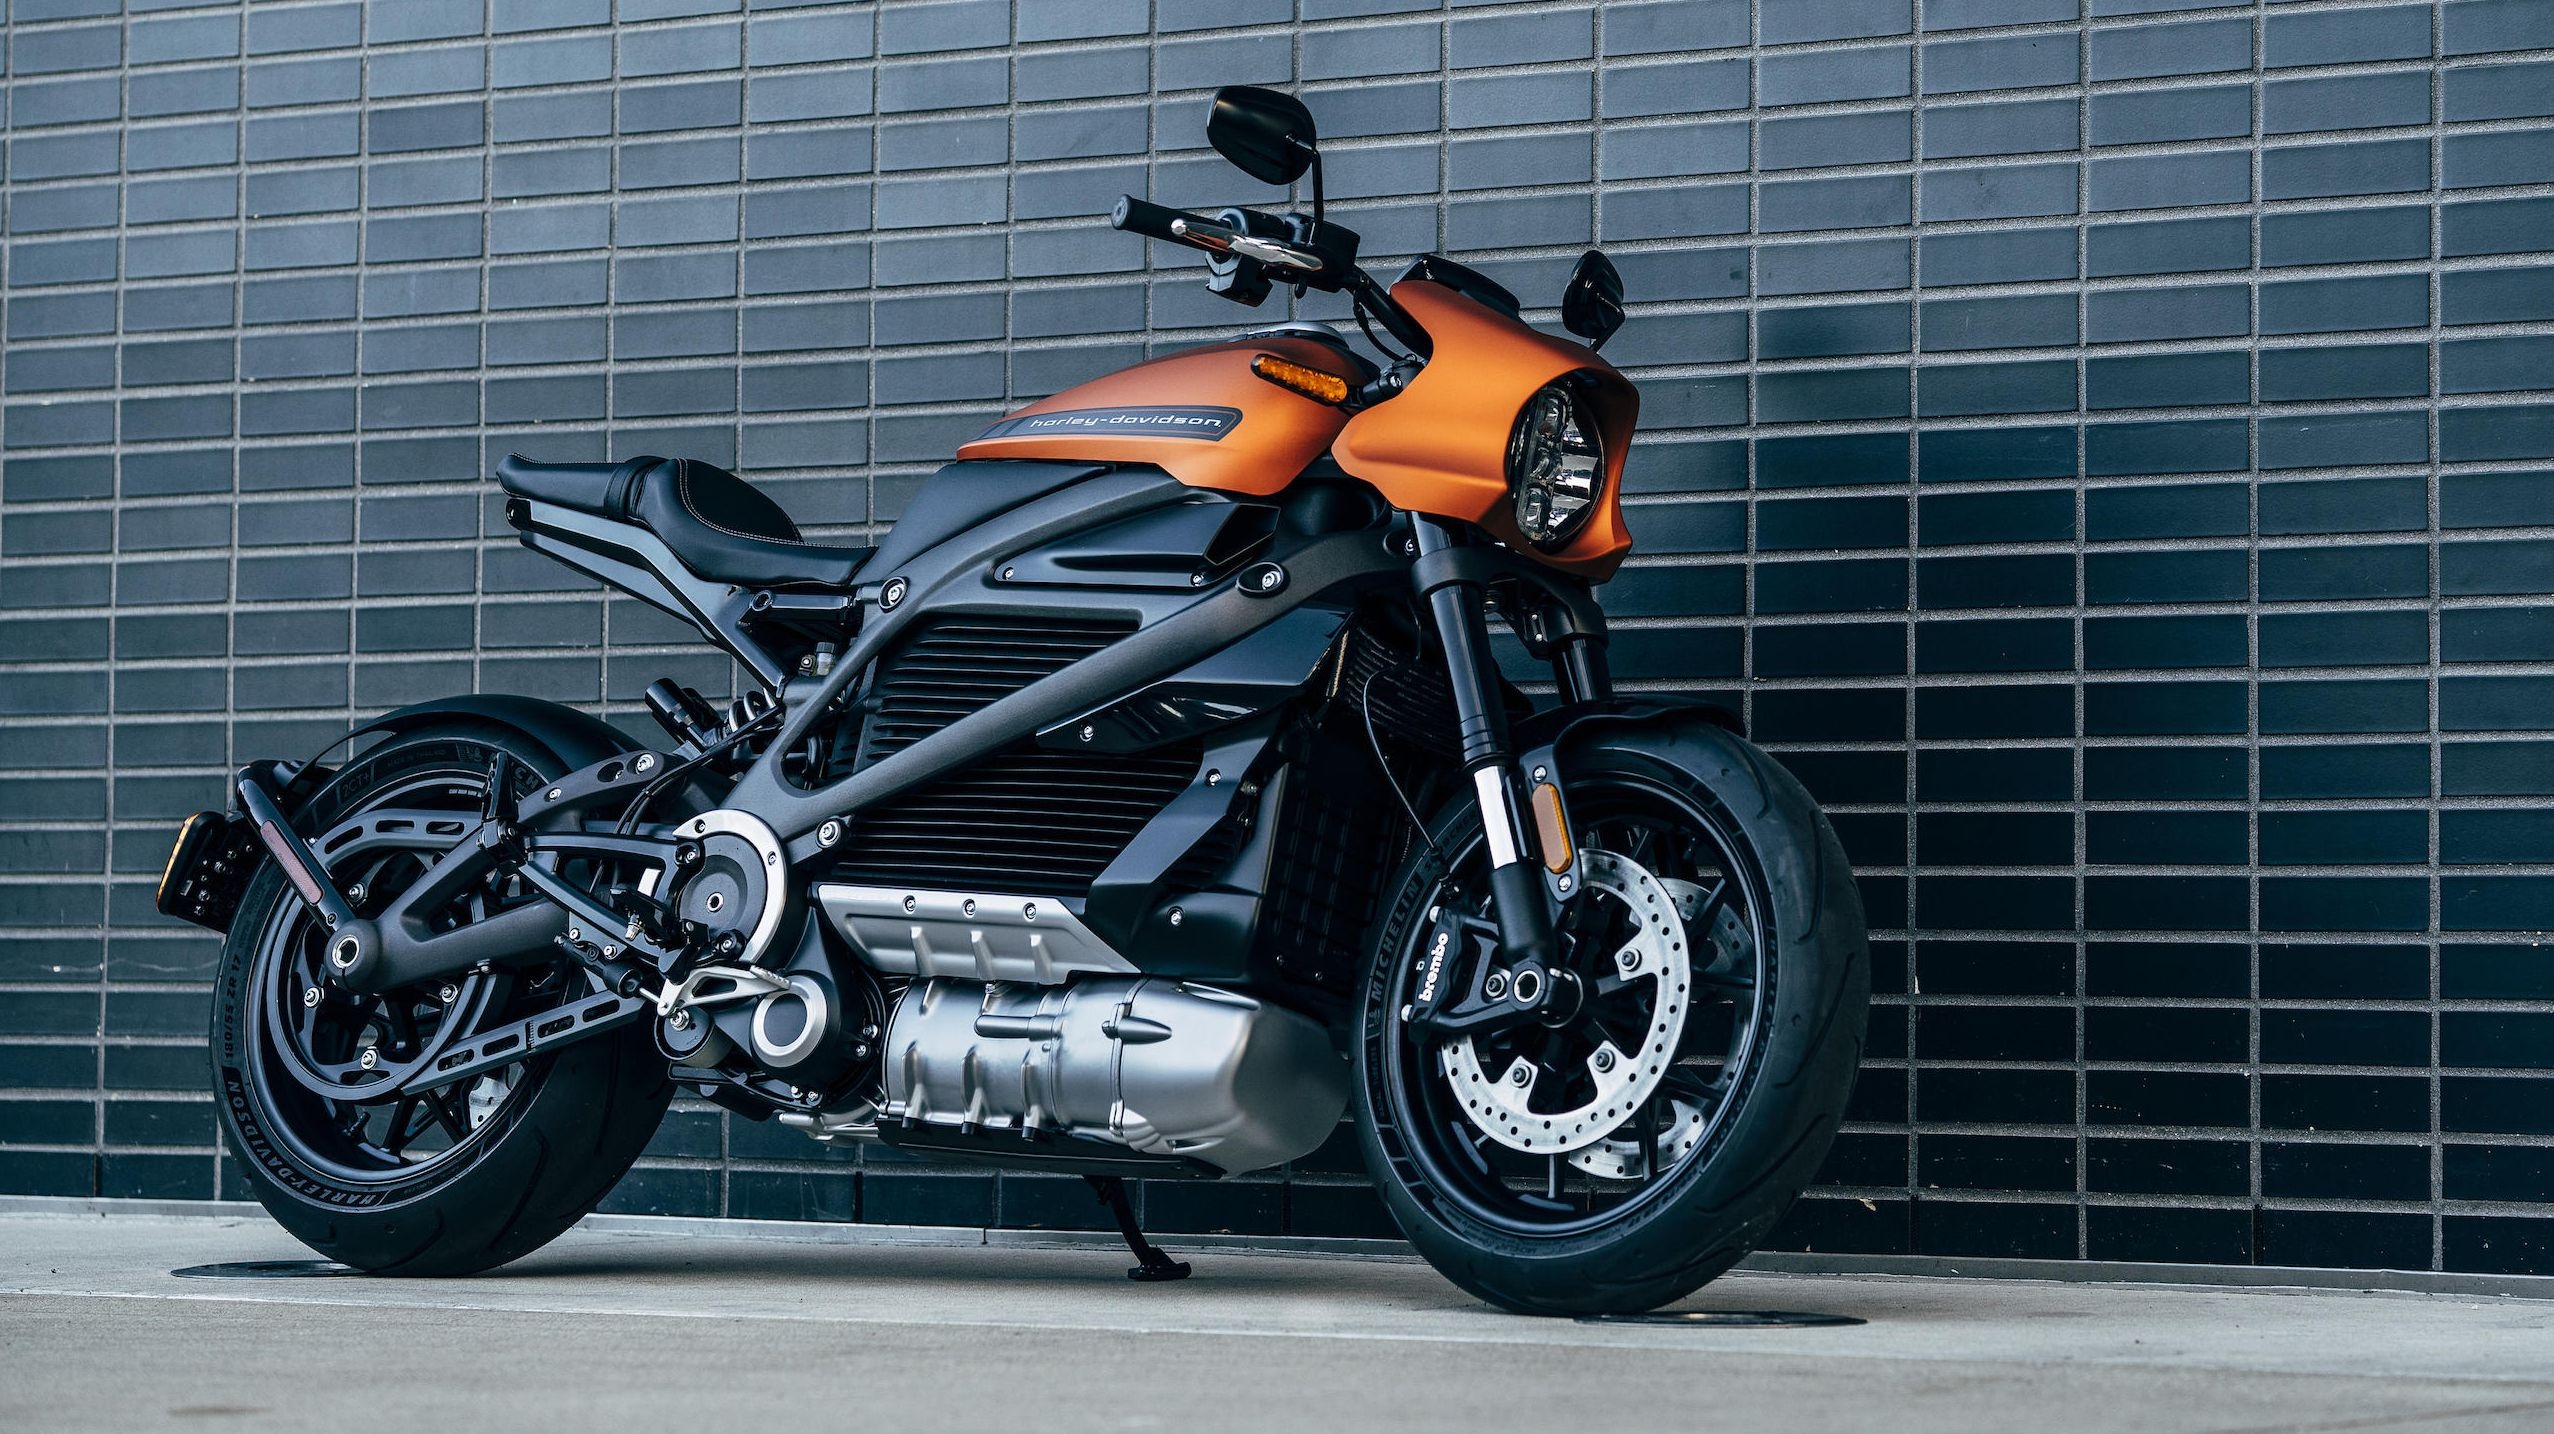 Harley Davidson Livewire, Electric motorcycle, Order now, RideMag Riders, 2560x1440 HD Desktop